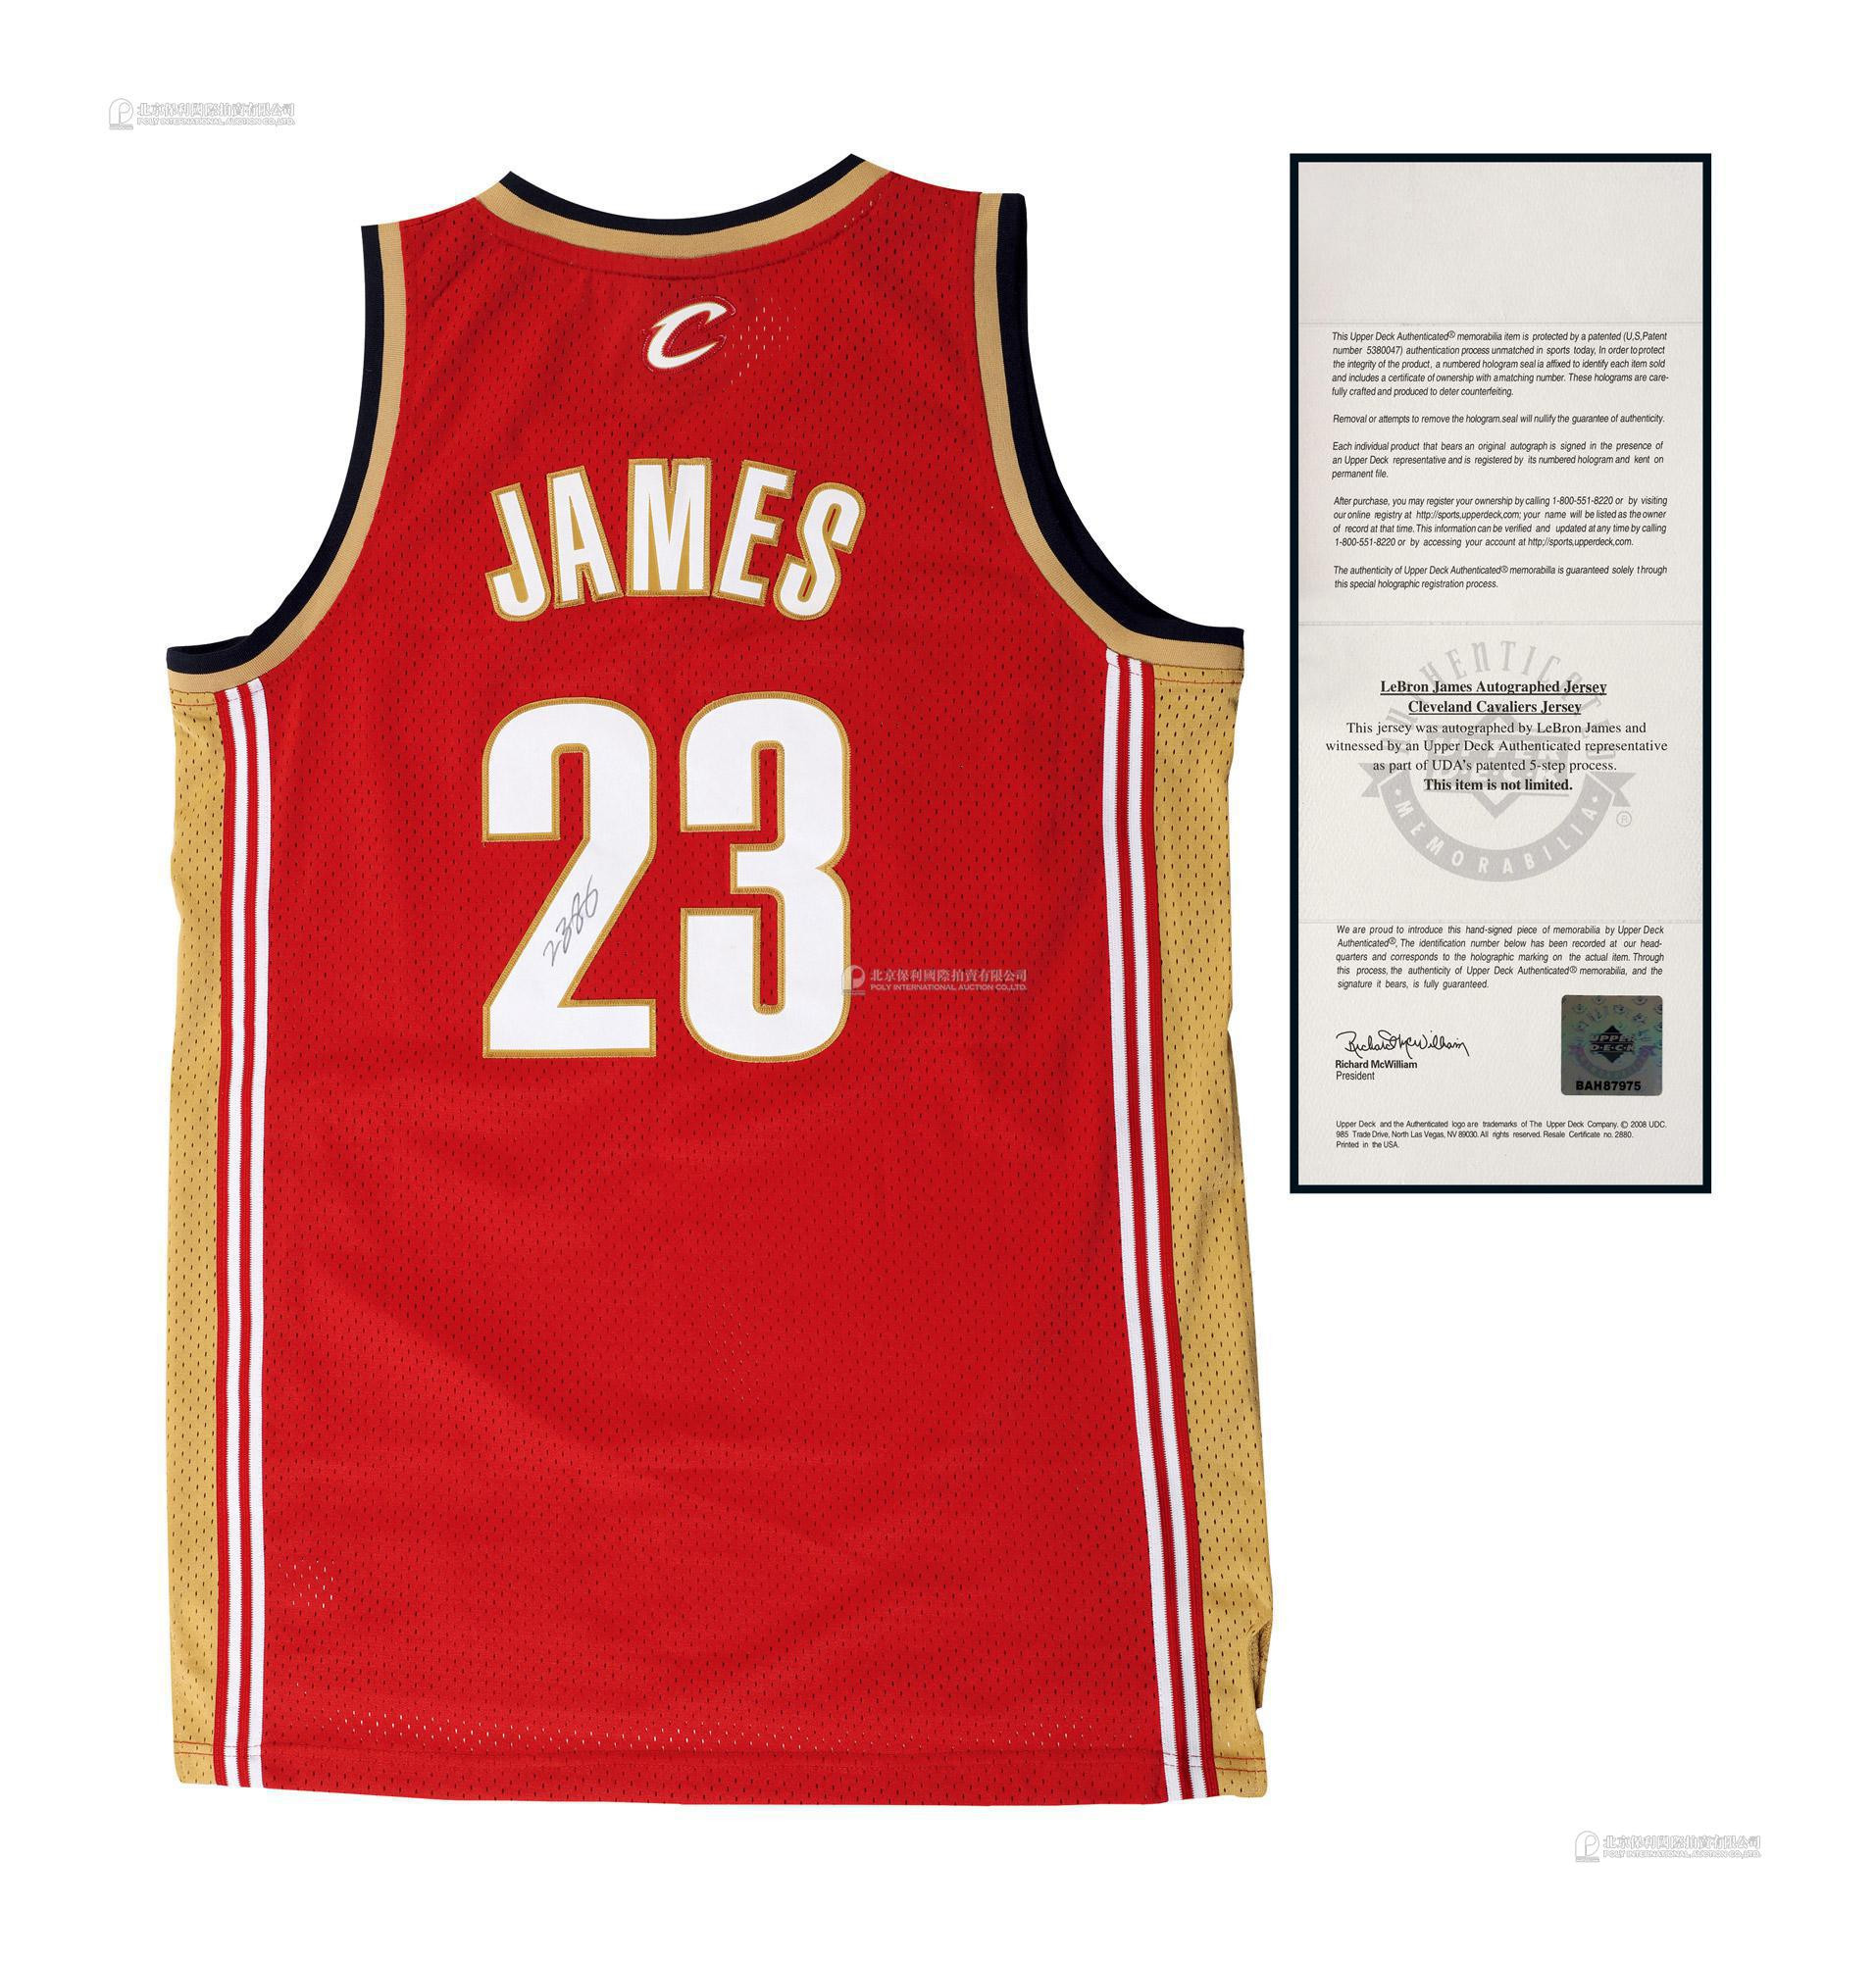 The autographed Cavaliers jersey of LeBron James, the “NBA Little Emperor”, with certificate